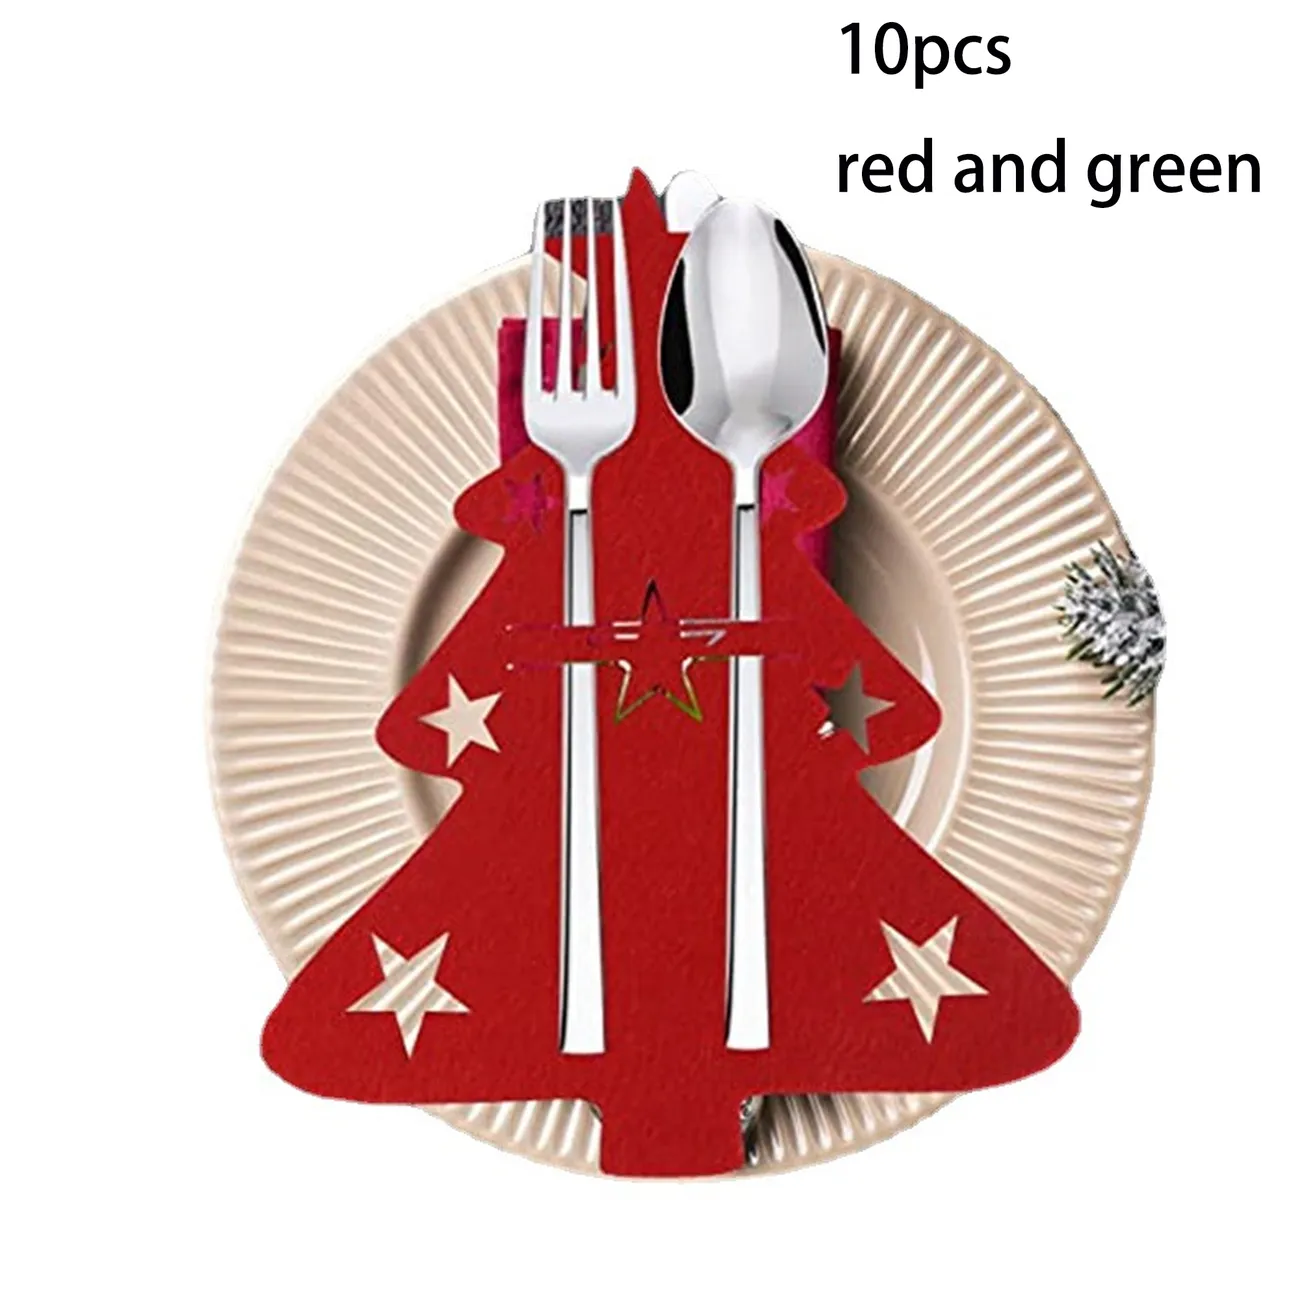 Set of 10 Christmas Cutlery Holders in Red and Green Felt Red big image 1